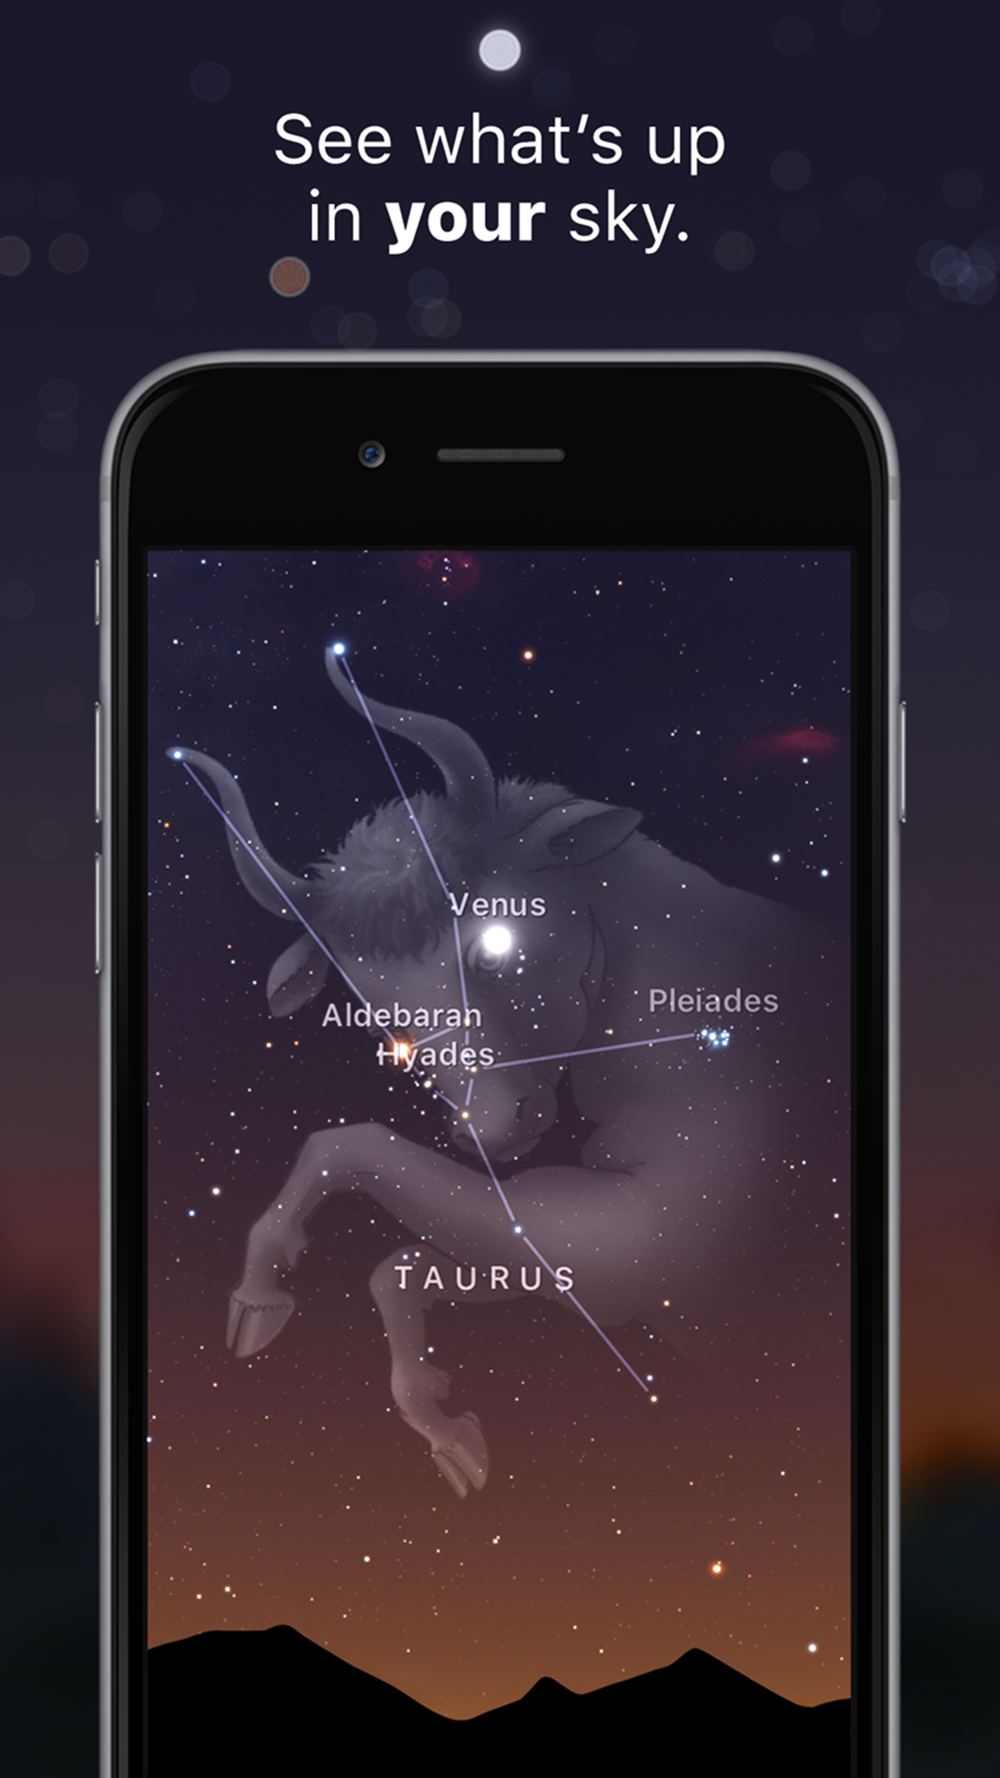 Sky guide app with a constellation on an iPhone